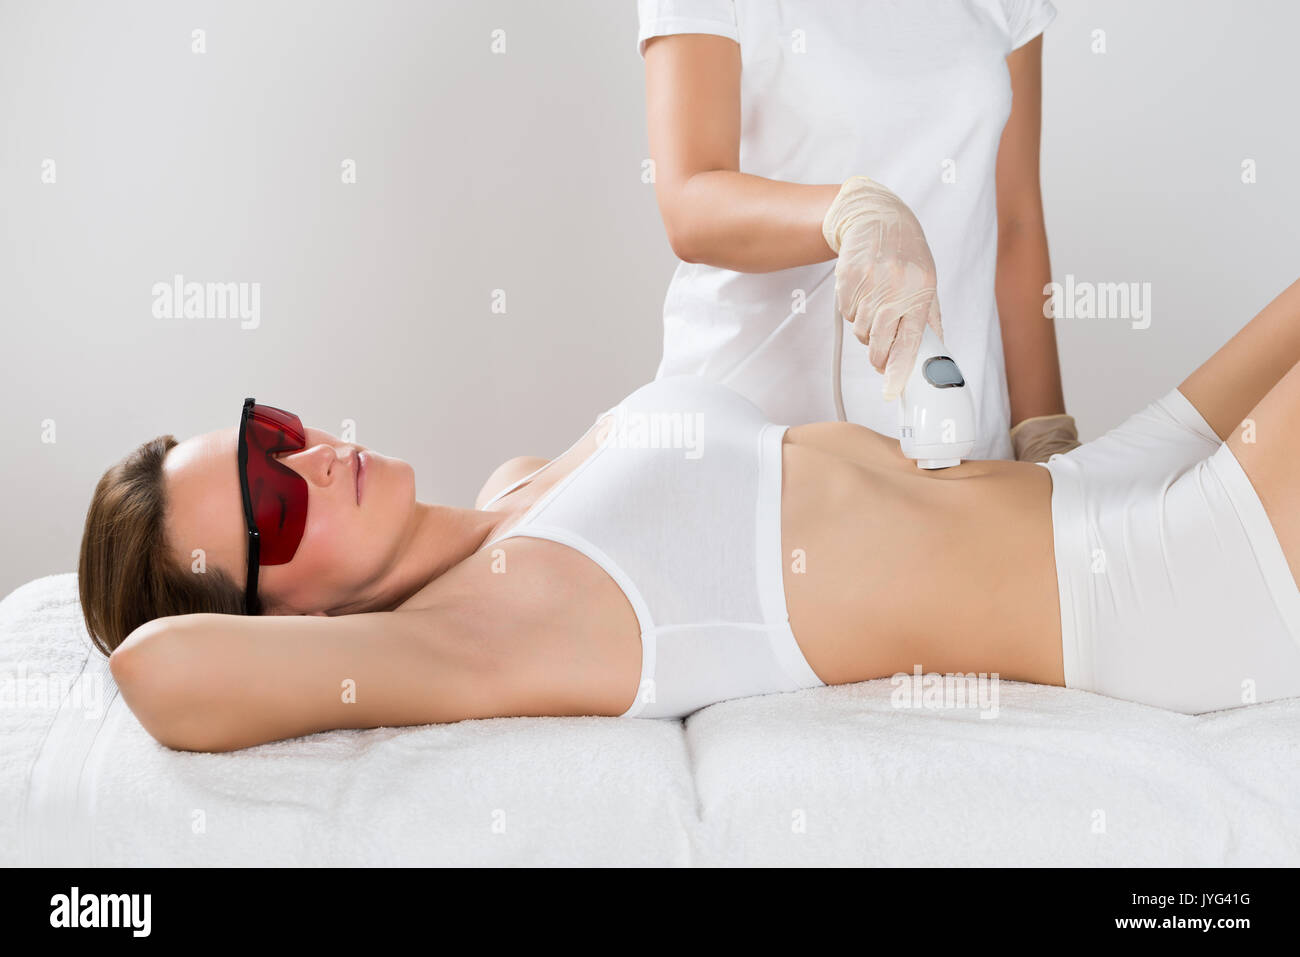 Young Woman Lying On Bed Receiving Epilation Laser Treatment On Tummy Stock Photo